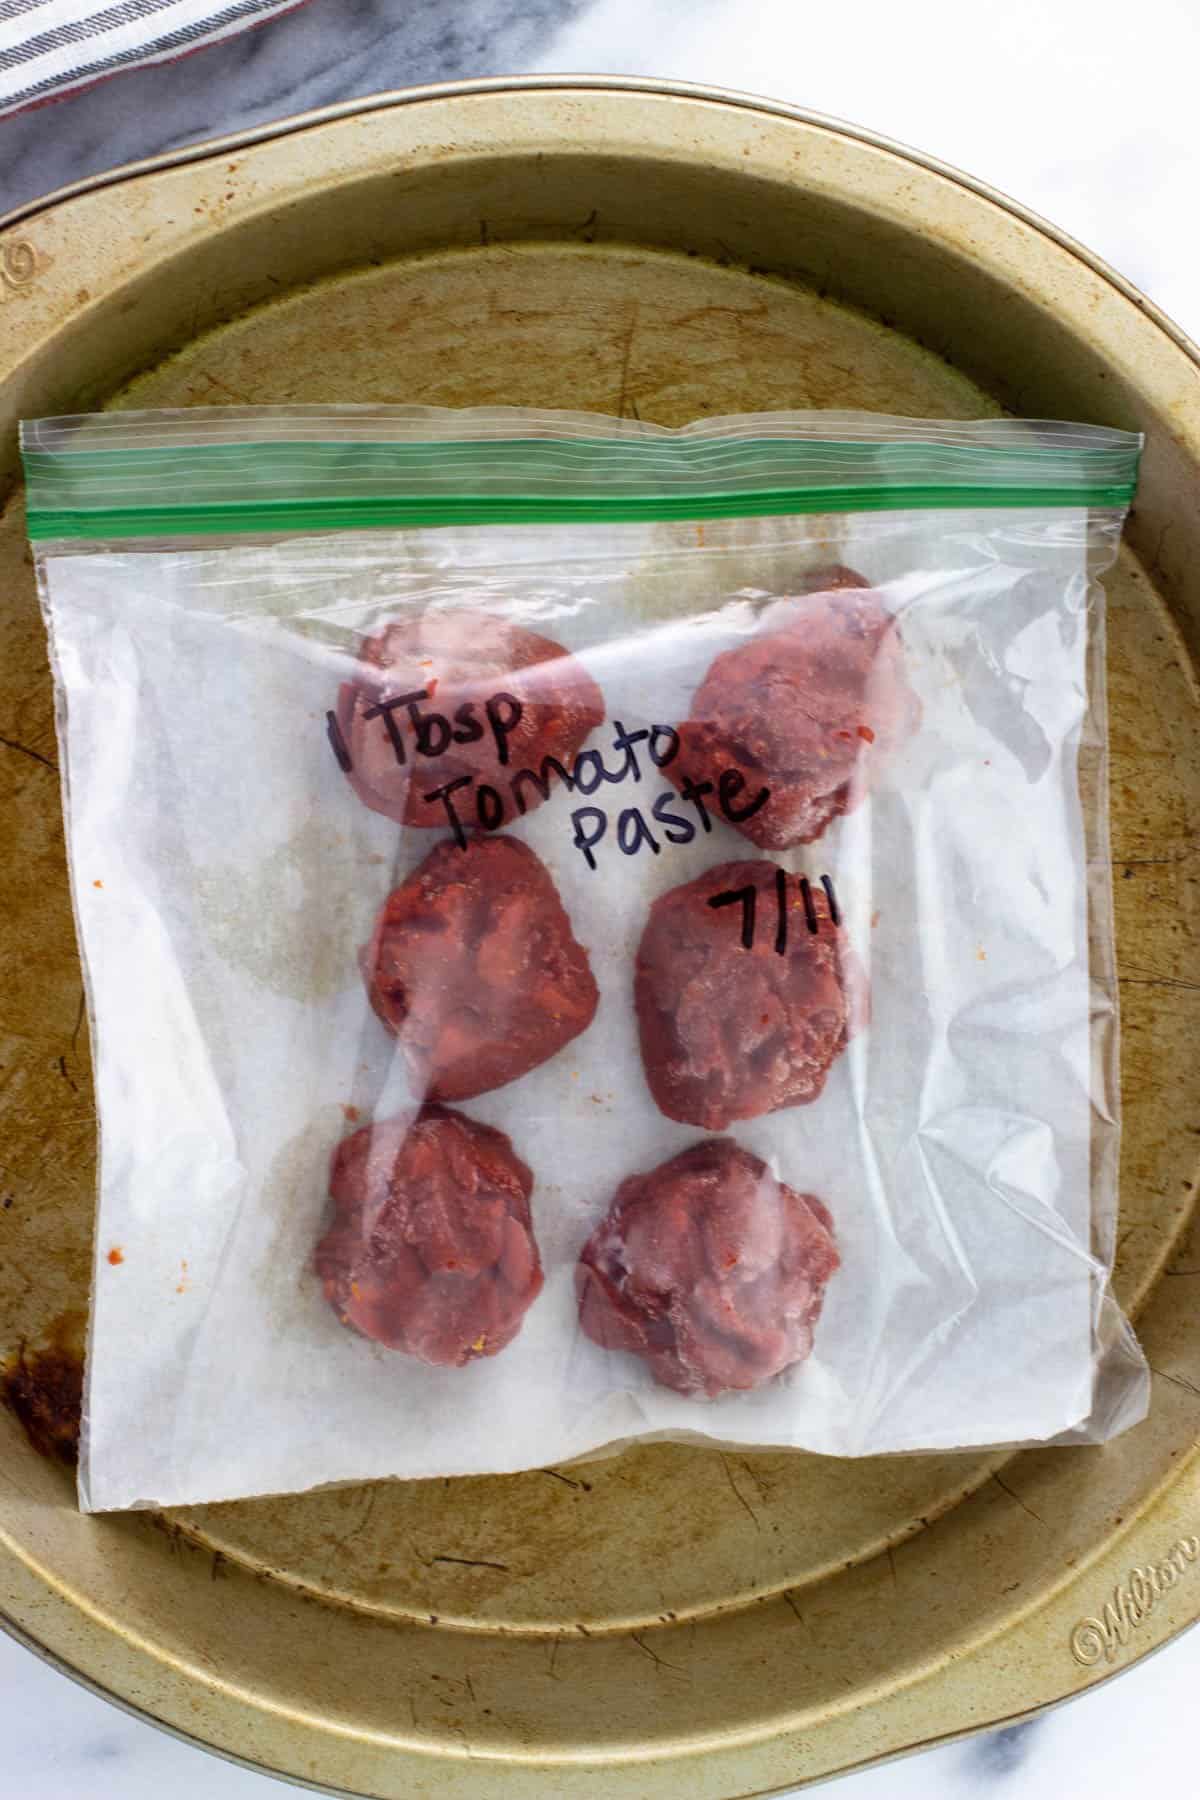 Frozen tomato paste blobs in a labeled plastic bag.